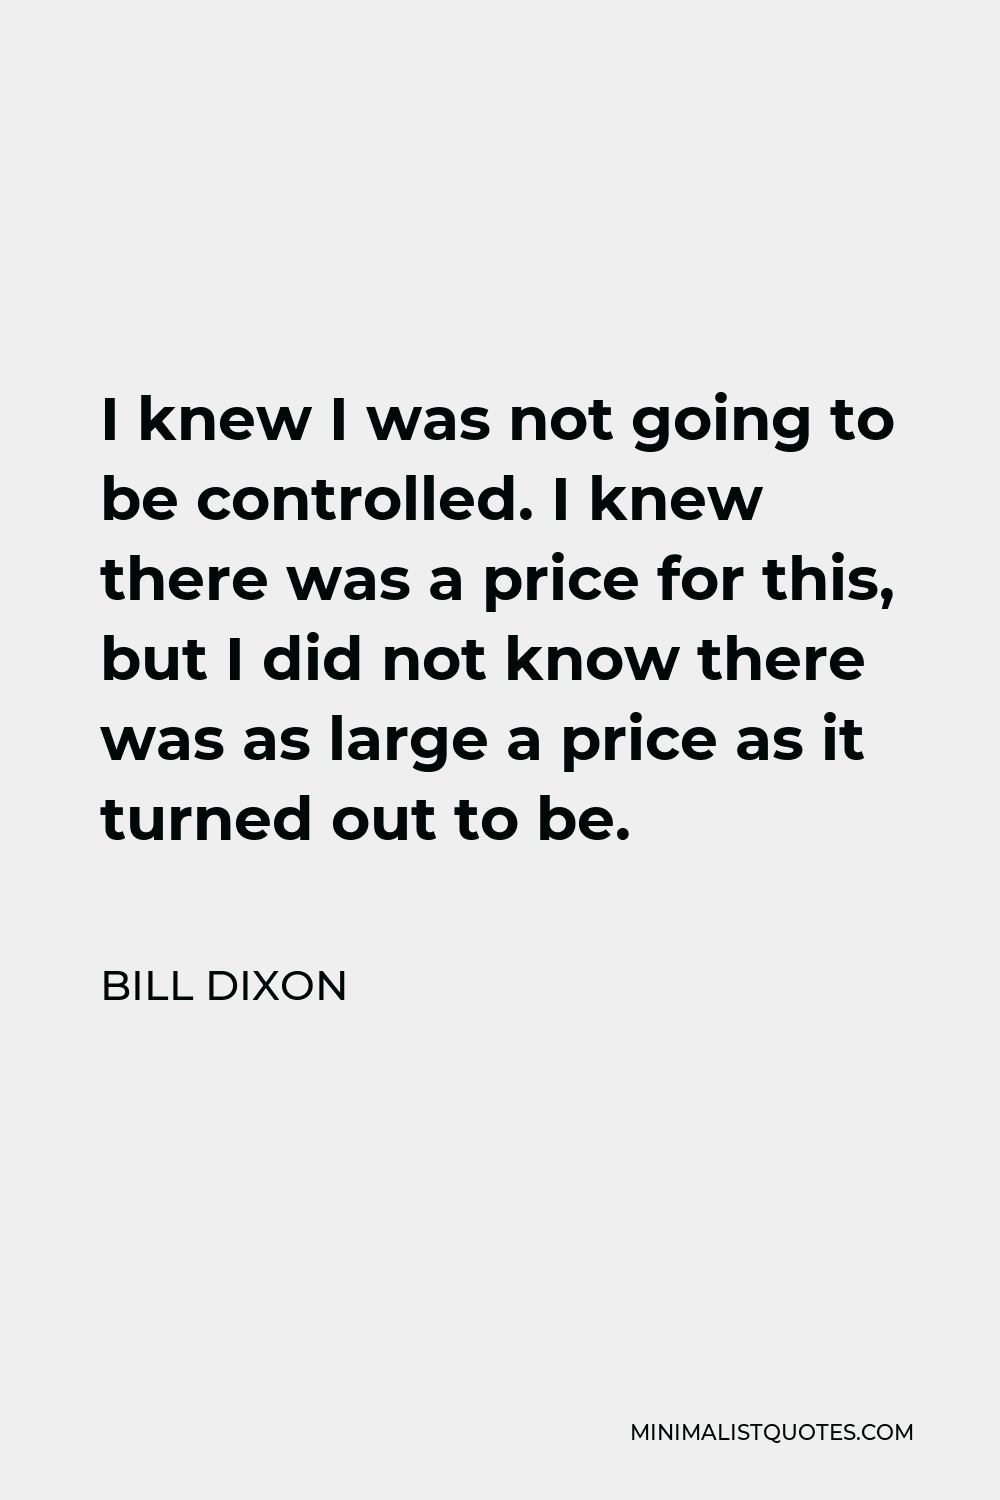 Bill Dixon Quote - I knew I was not going to be controlled. I knew there was a price for this, but I did not know there was as large a price as it turned out to be.